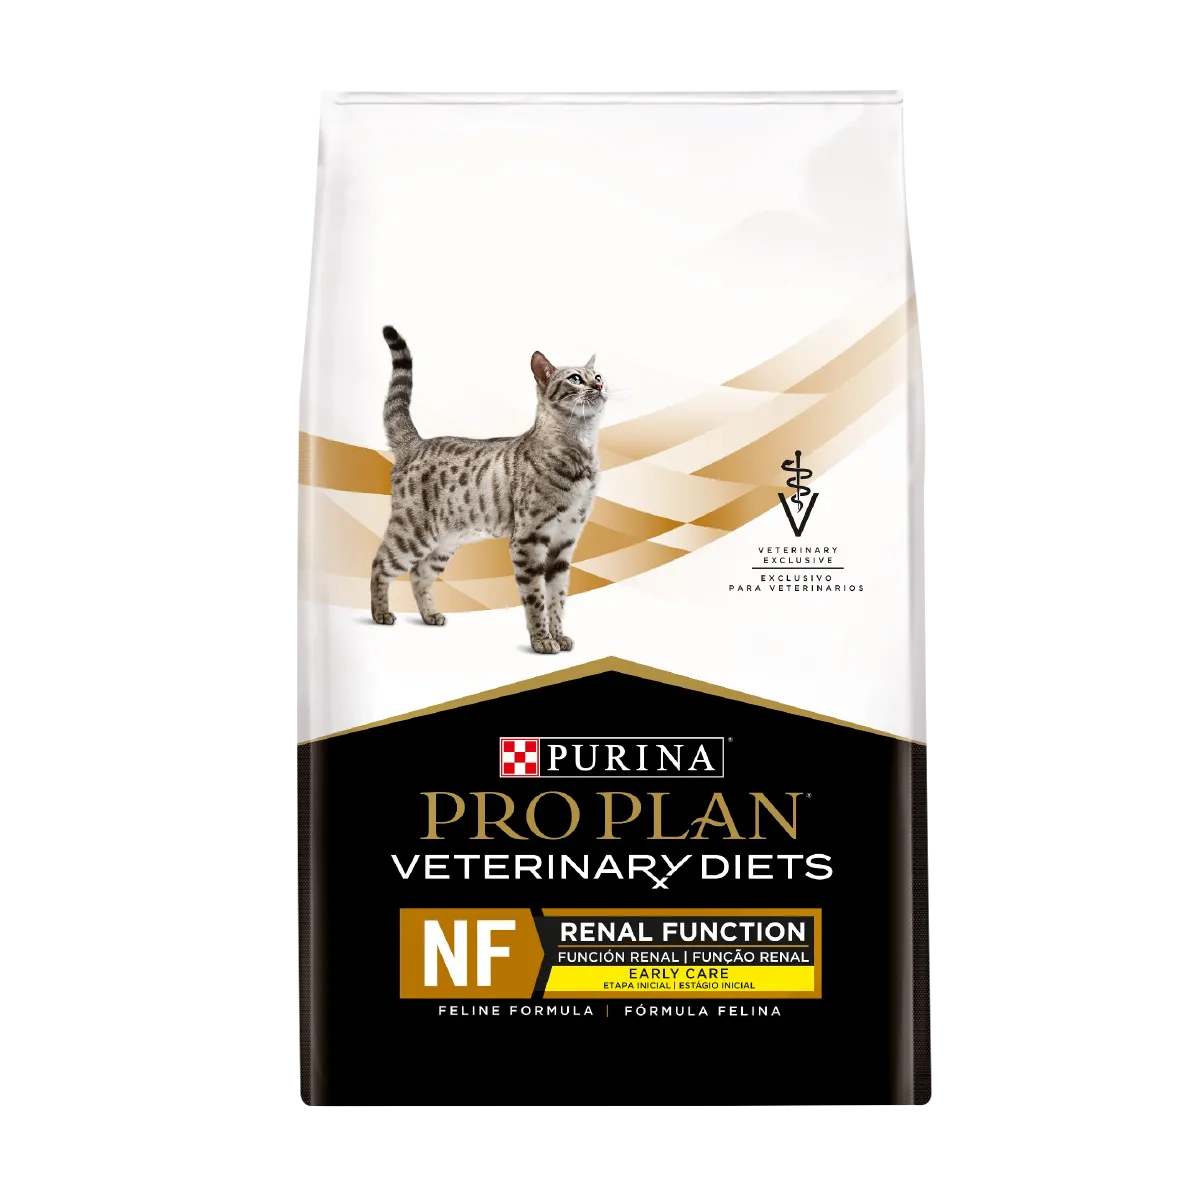 purina-pro-plan-veterinay-diets-cat-nf-renal-function-early-care.png.webp